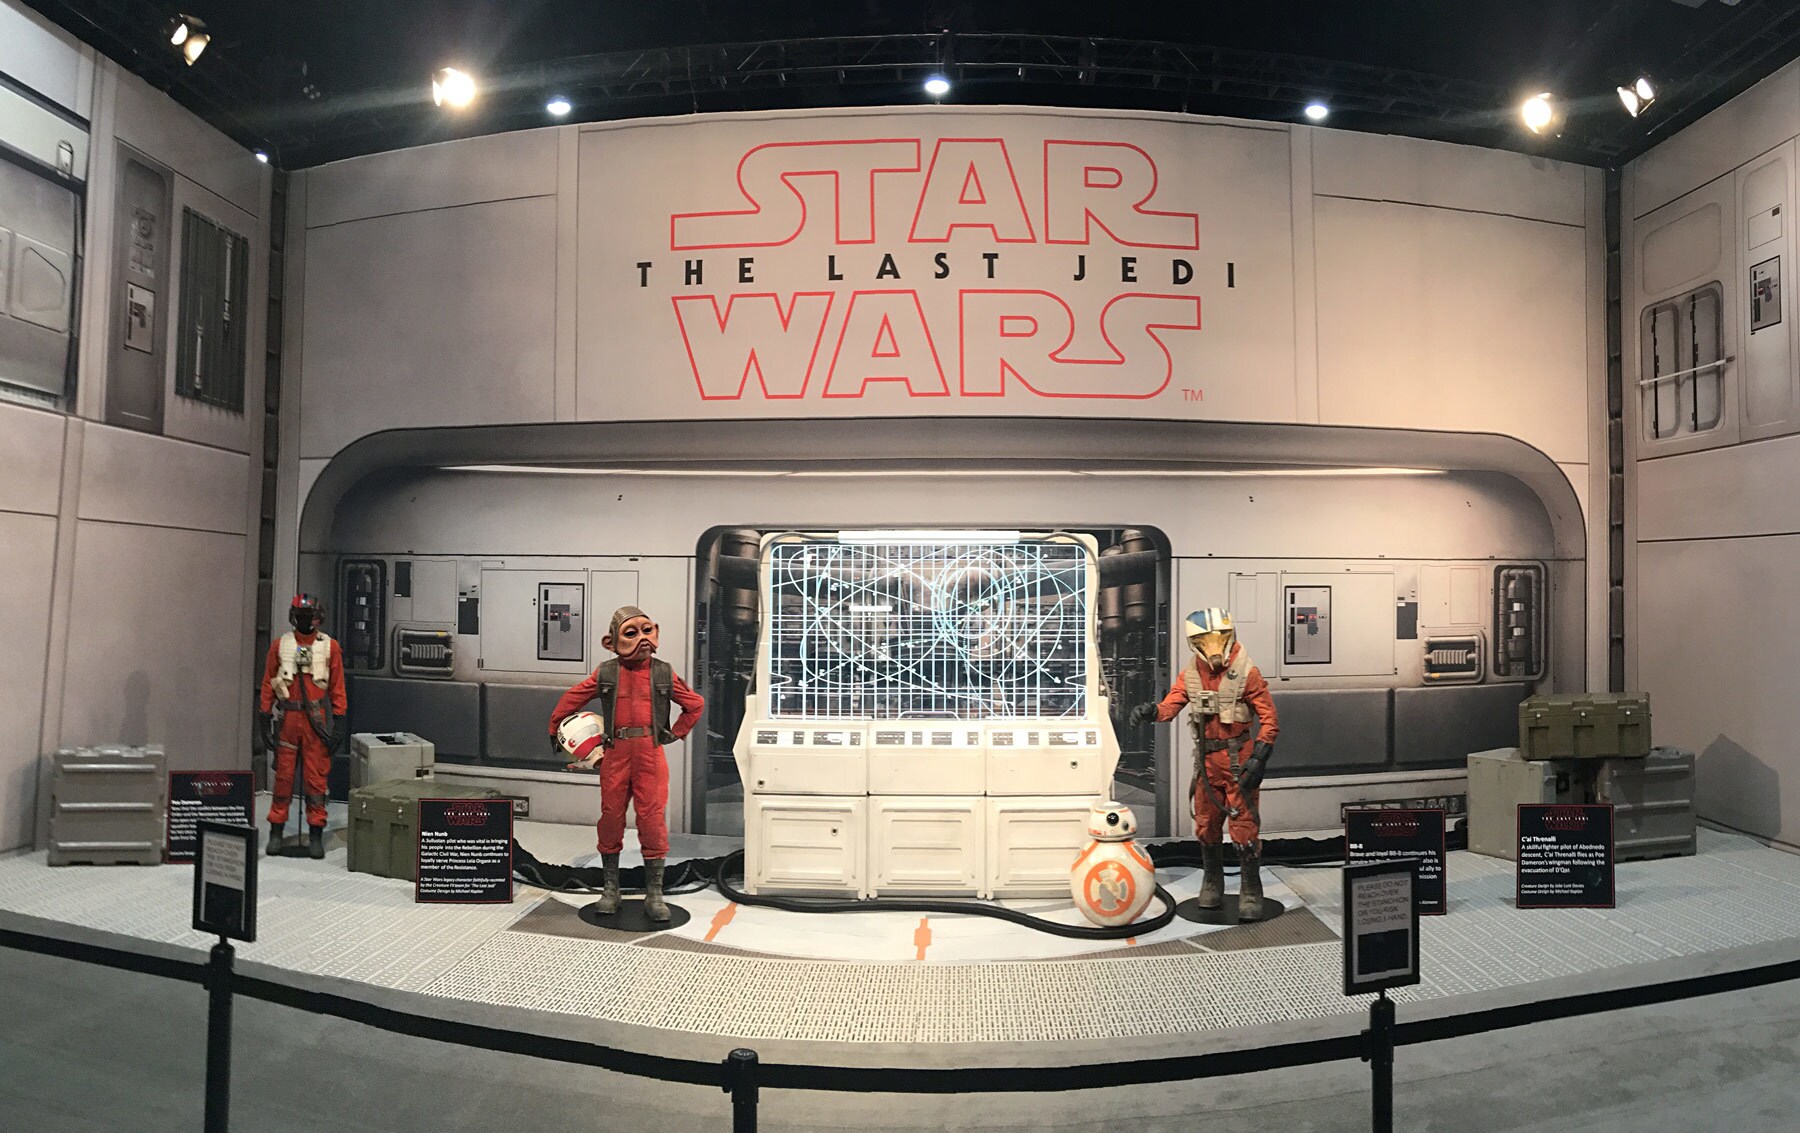 Props, costumes, and the characters BB-8 and Nien Nunb, from Star Wars: The Last Jedi, are put on display at San Diego Comic-Con.